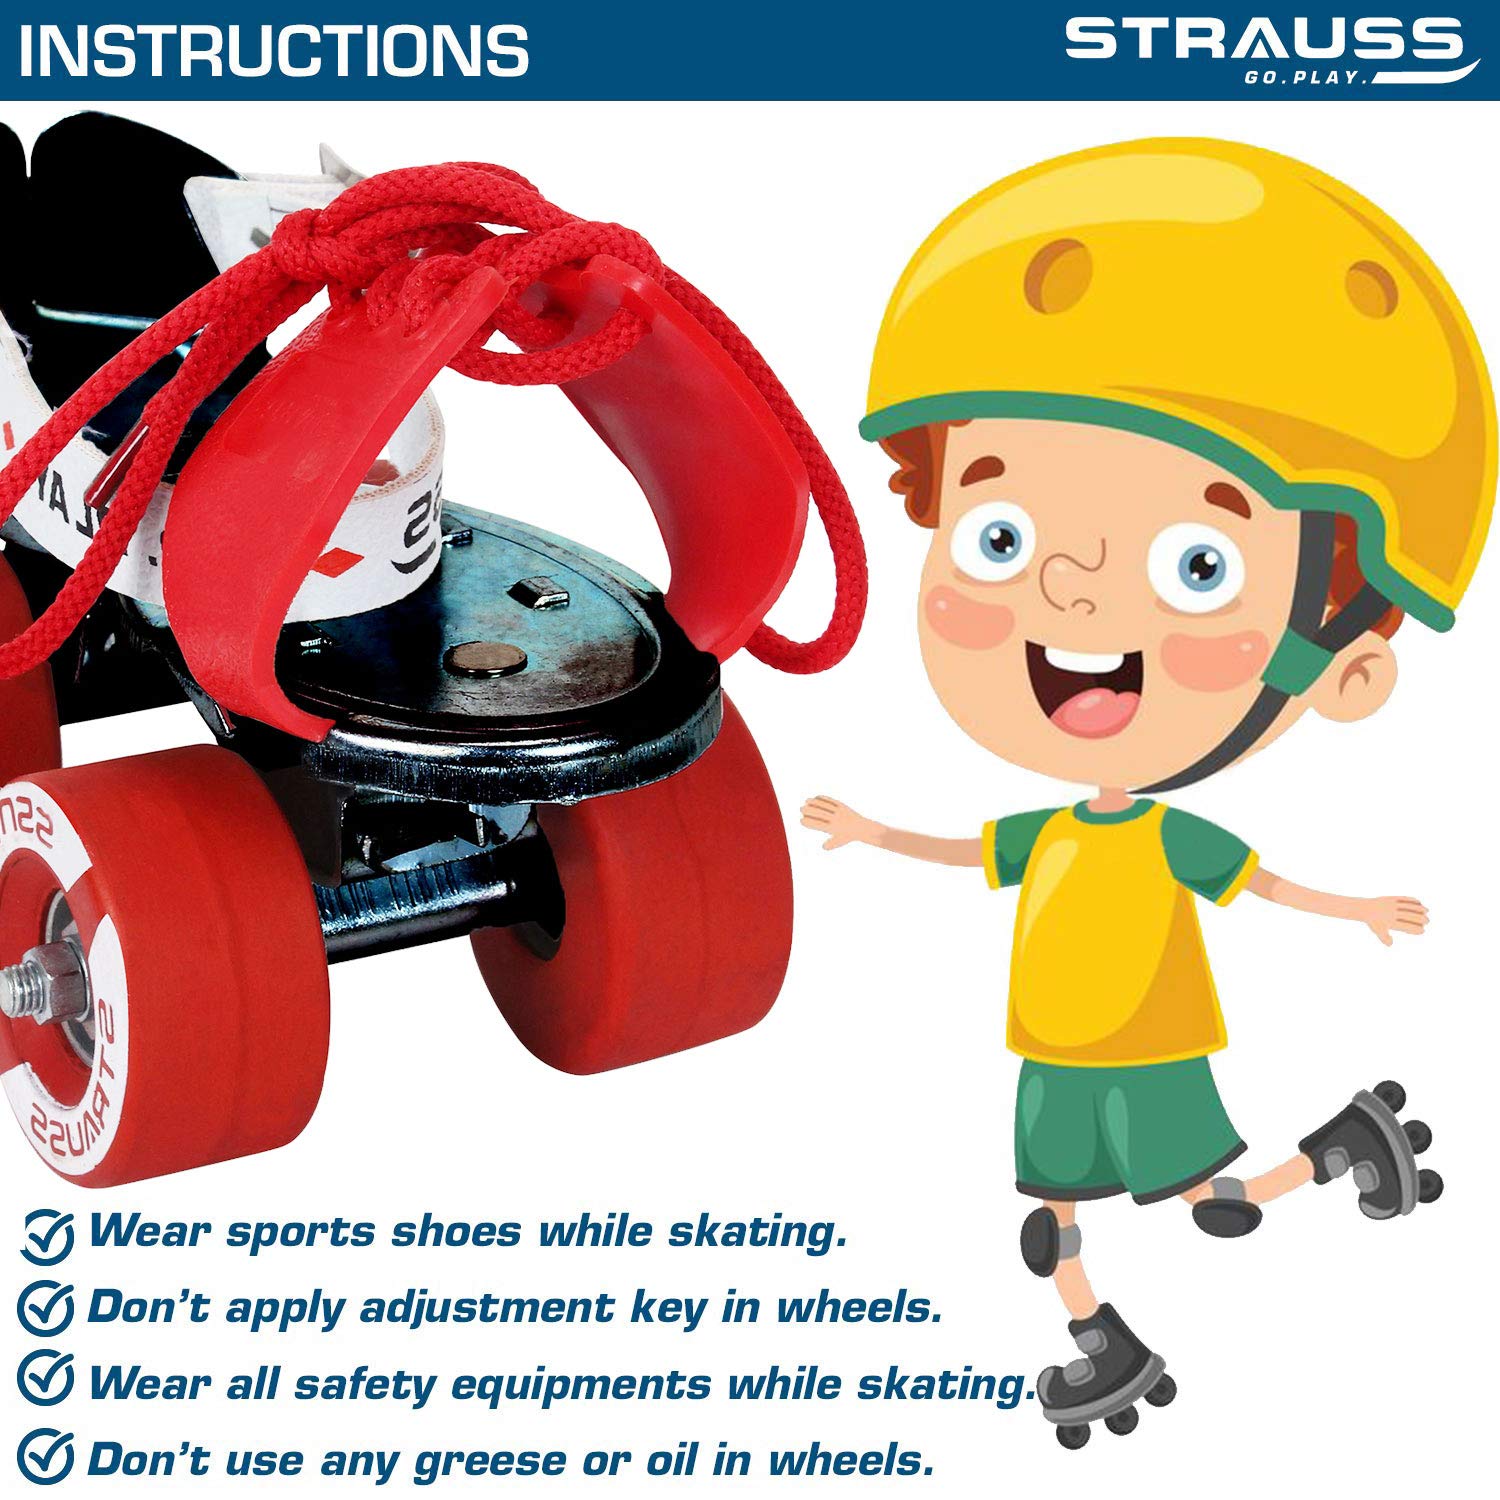 STRAUSS Tenacity Roller Skates | Roller Blades for Kids | Adjustable Shoe Size | 4 Wheels Skating Shoe for Boys and Girls | Ideal for Indoor and Outdoor Skating | Age Group 4-6 Years, (Black)